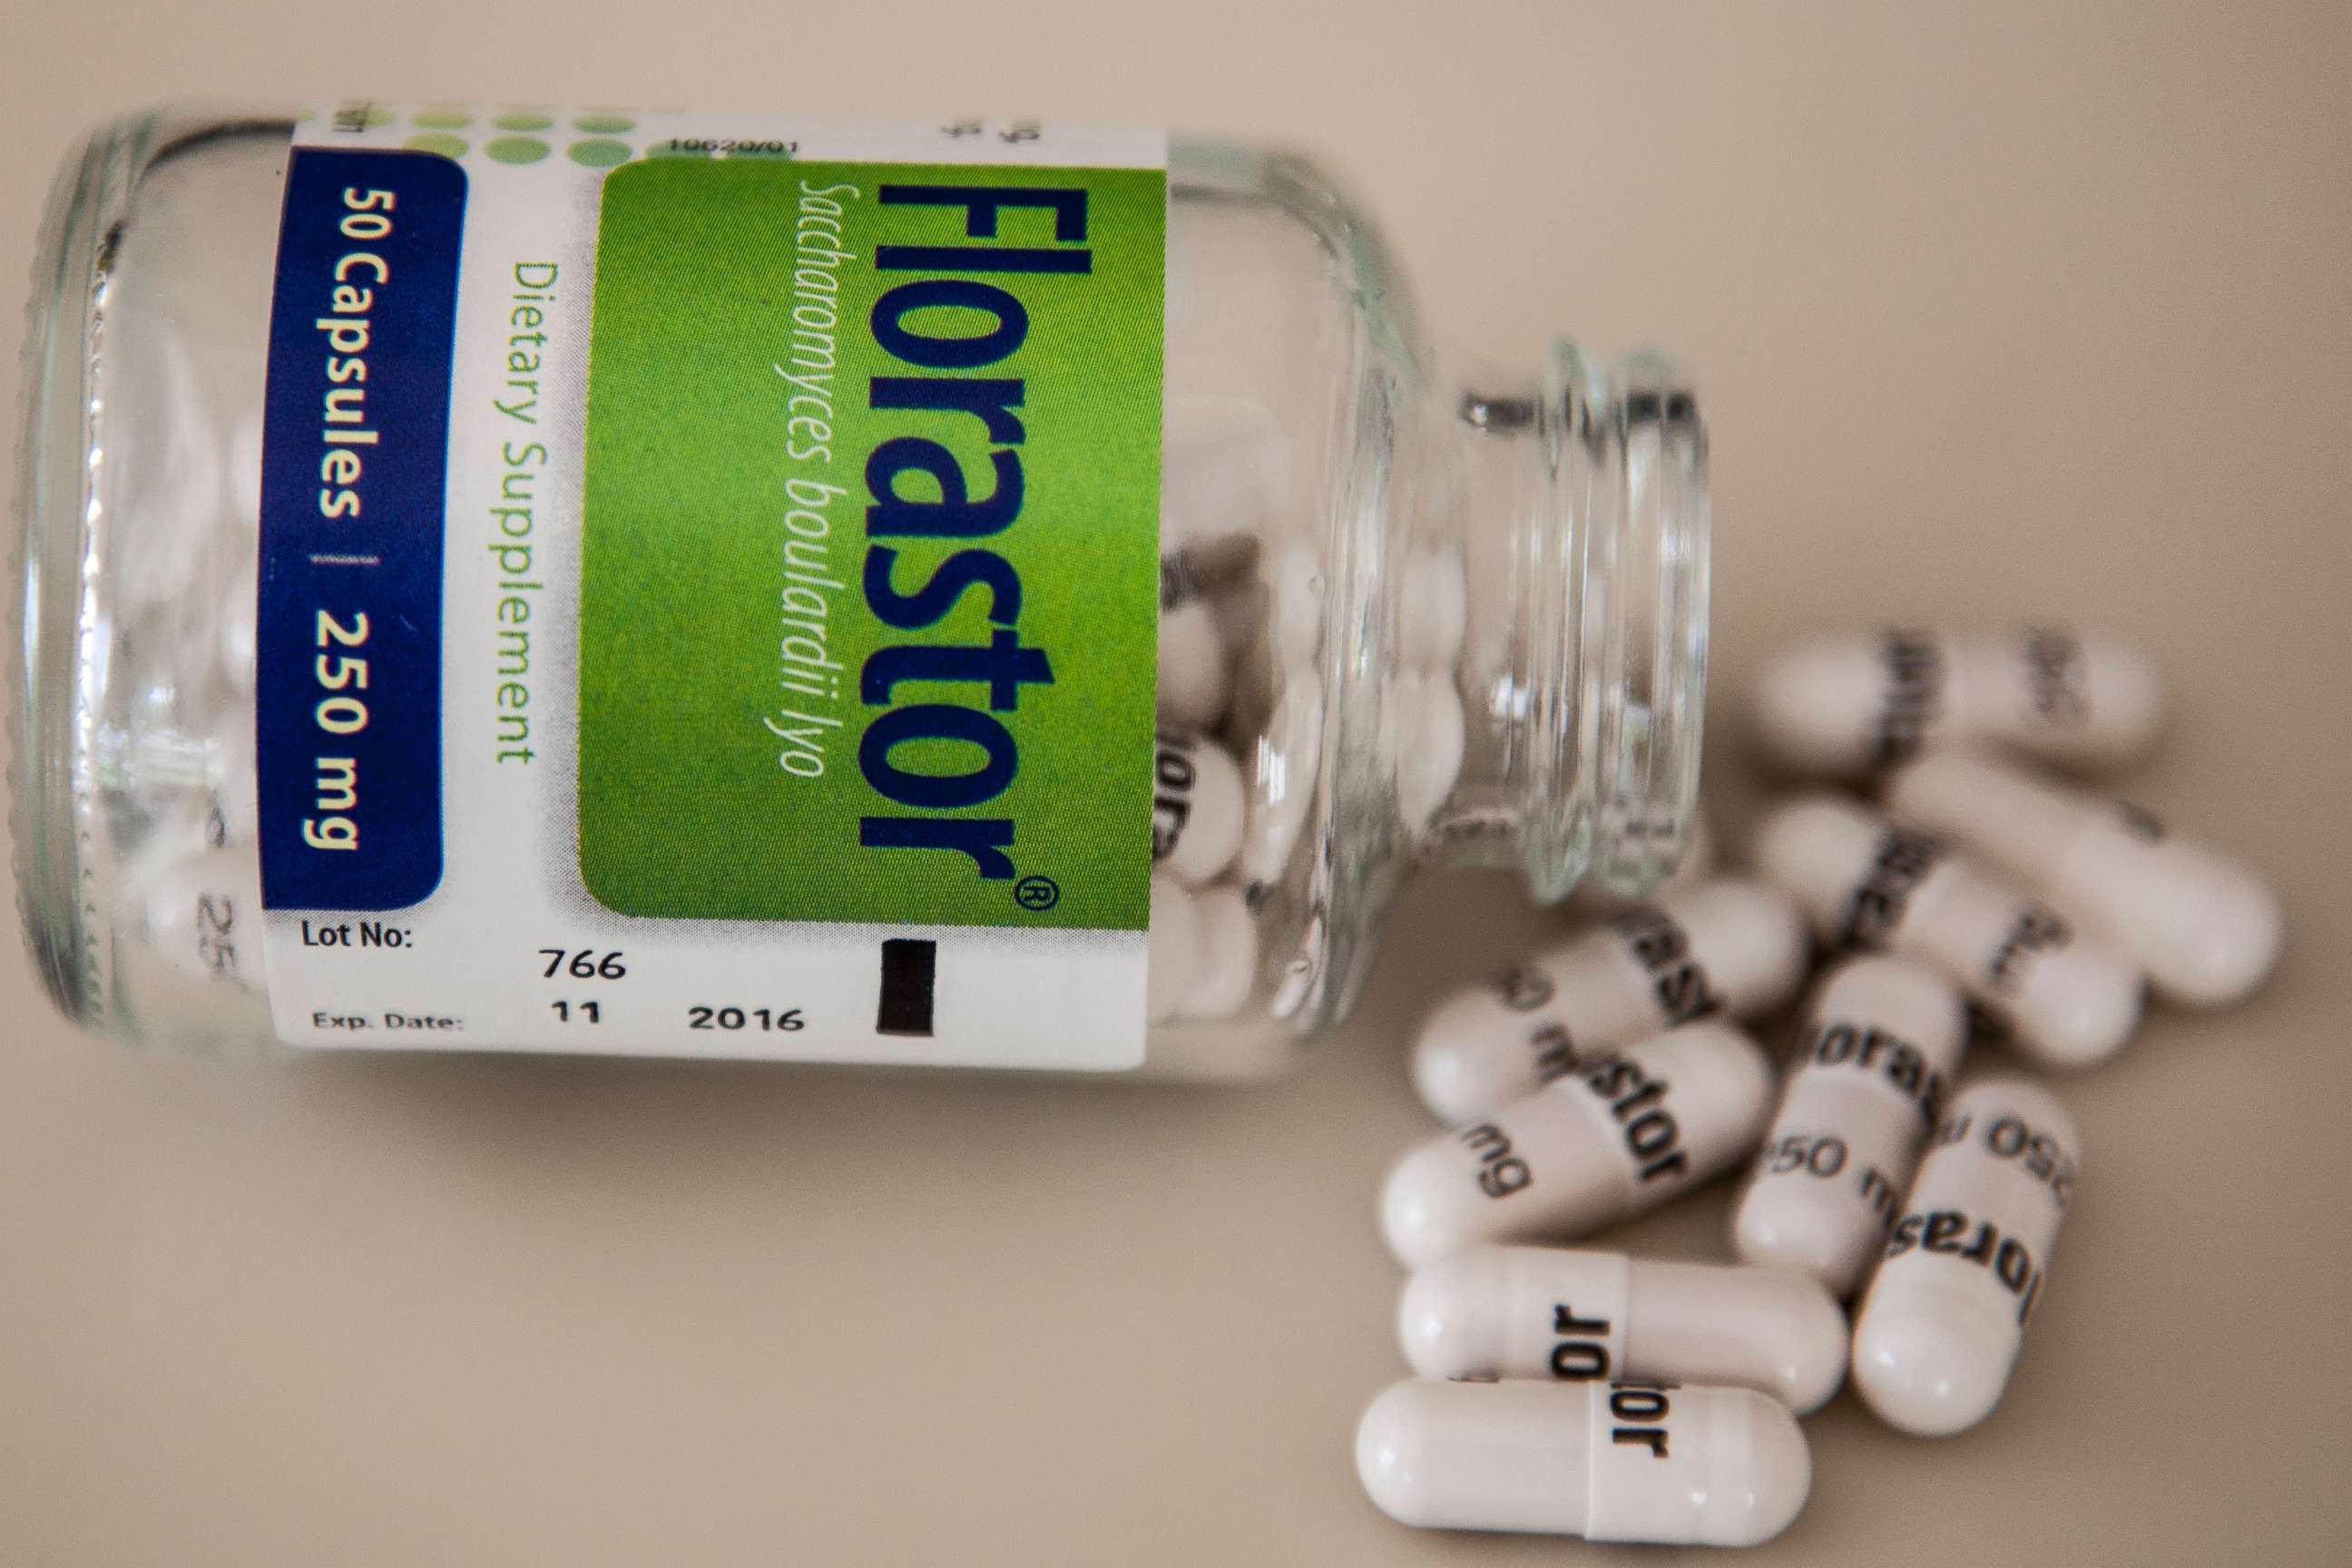 Florastor is used as a probiotic or friendly bacteria to maintain normal bowel function and promote intestinal health.